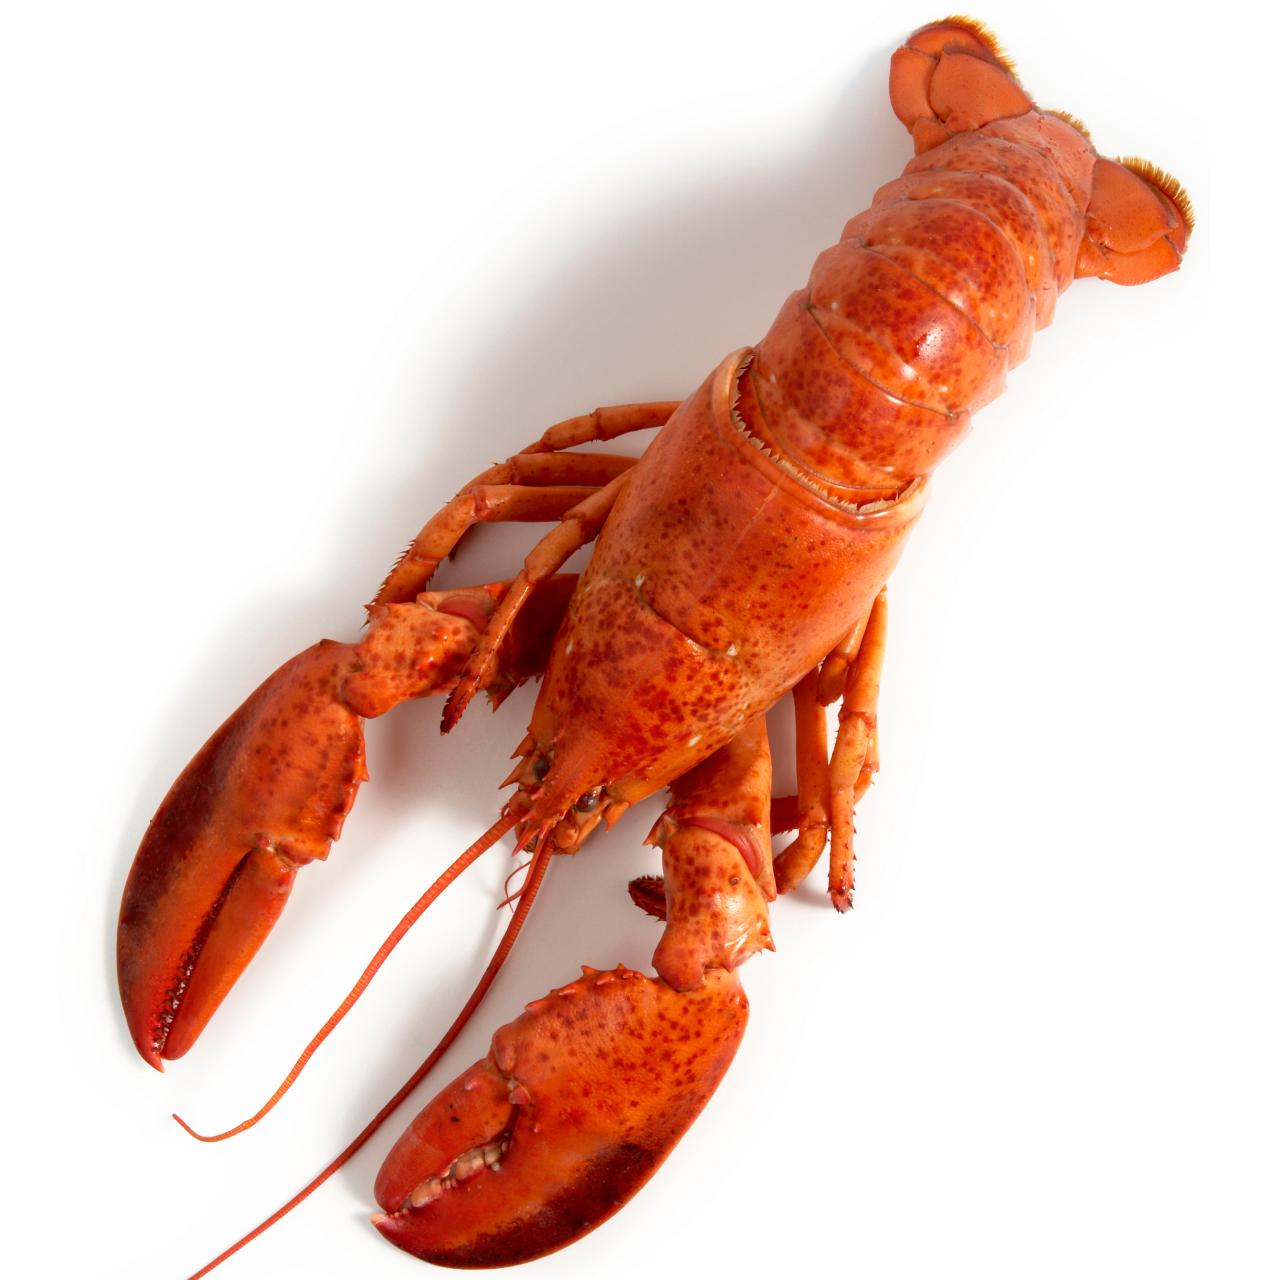 A Guide for Buying and Cooking Lobster : Recipes and Cooking